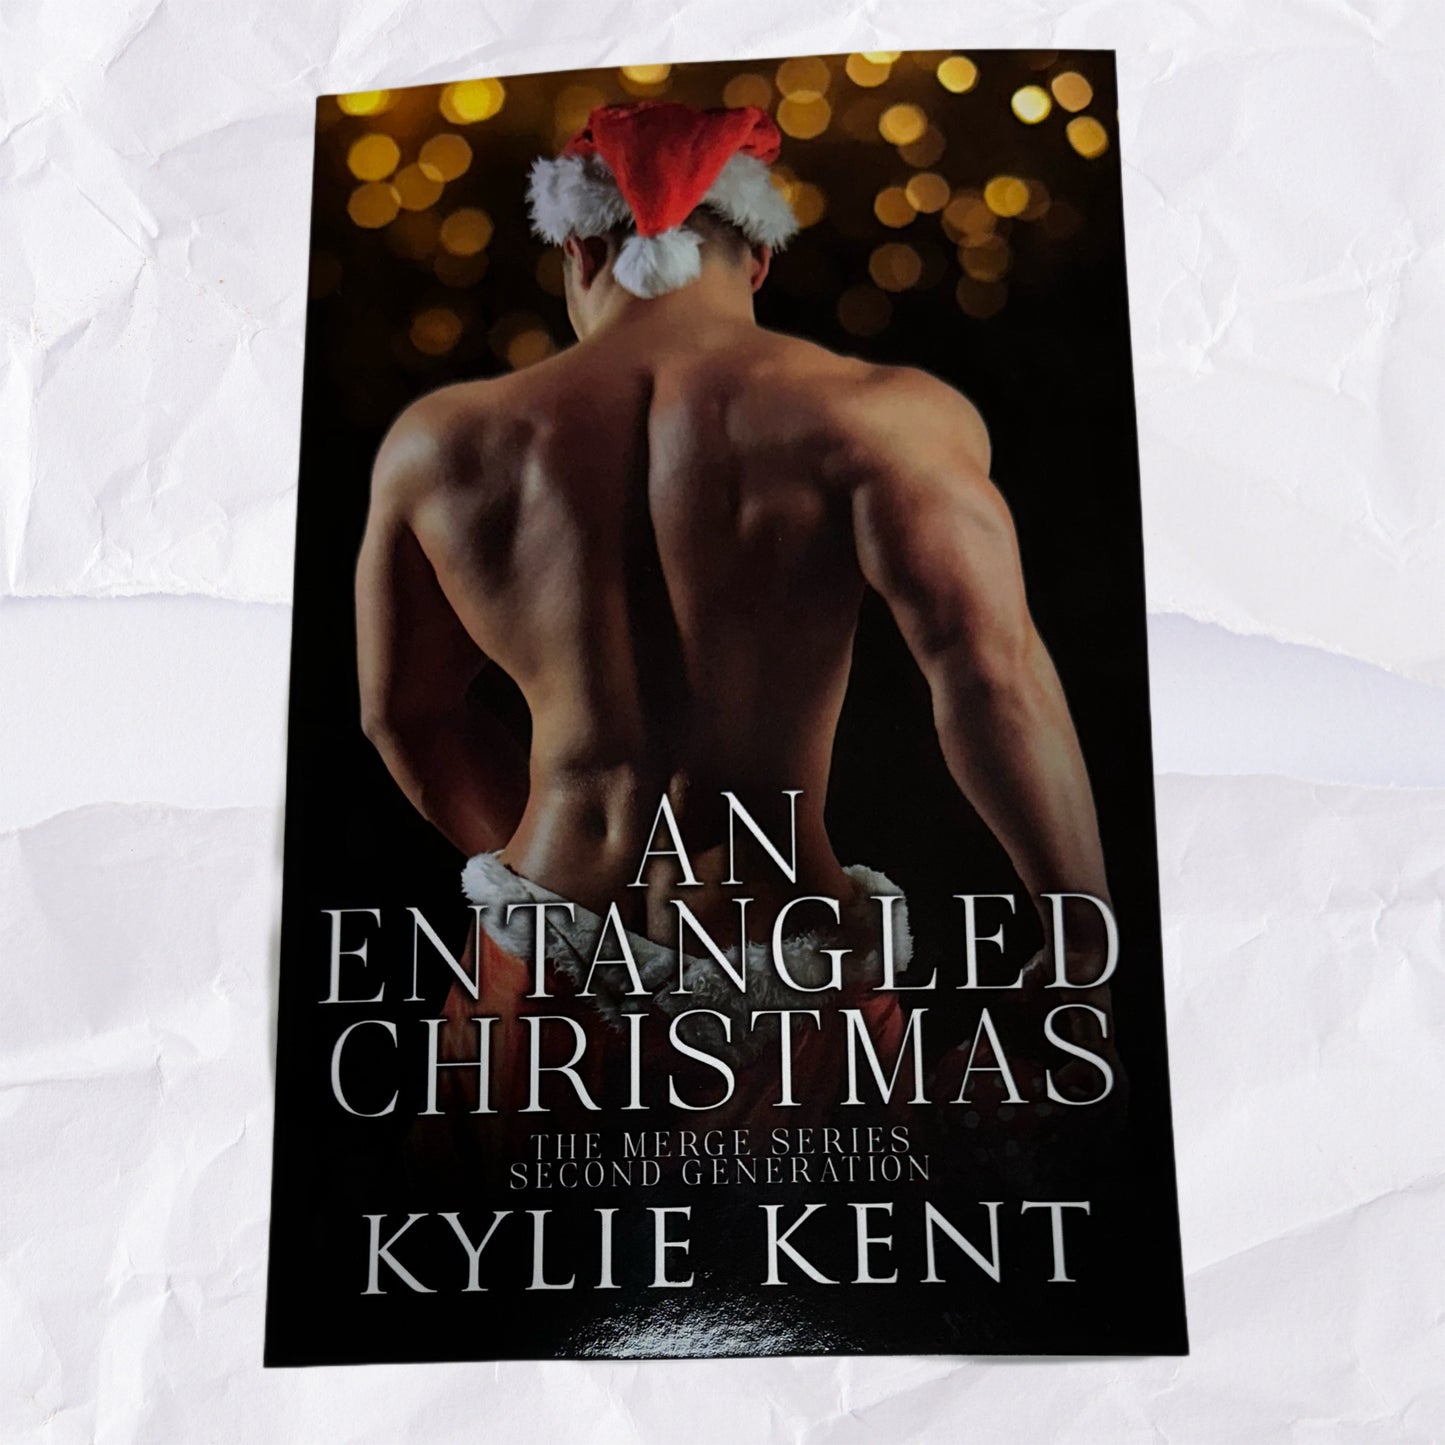 An Entangled Christmas (The Merge 2nd Gen #2) by Kylie Kent